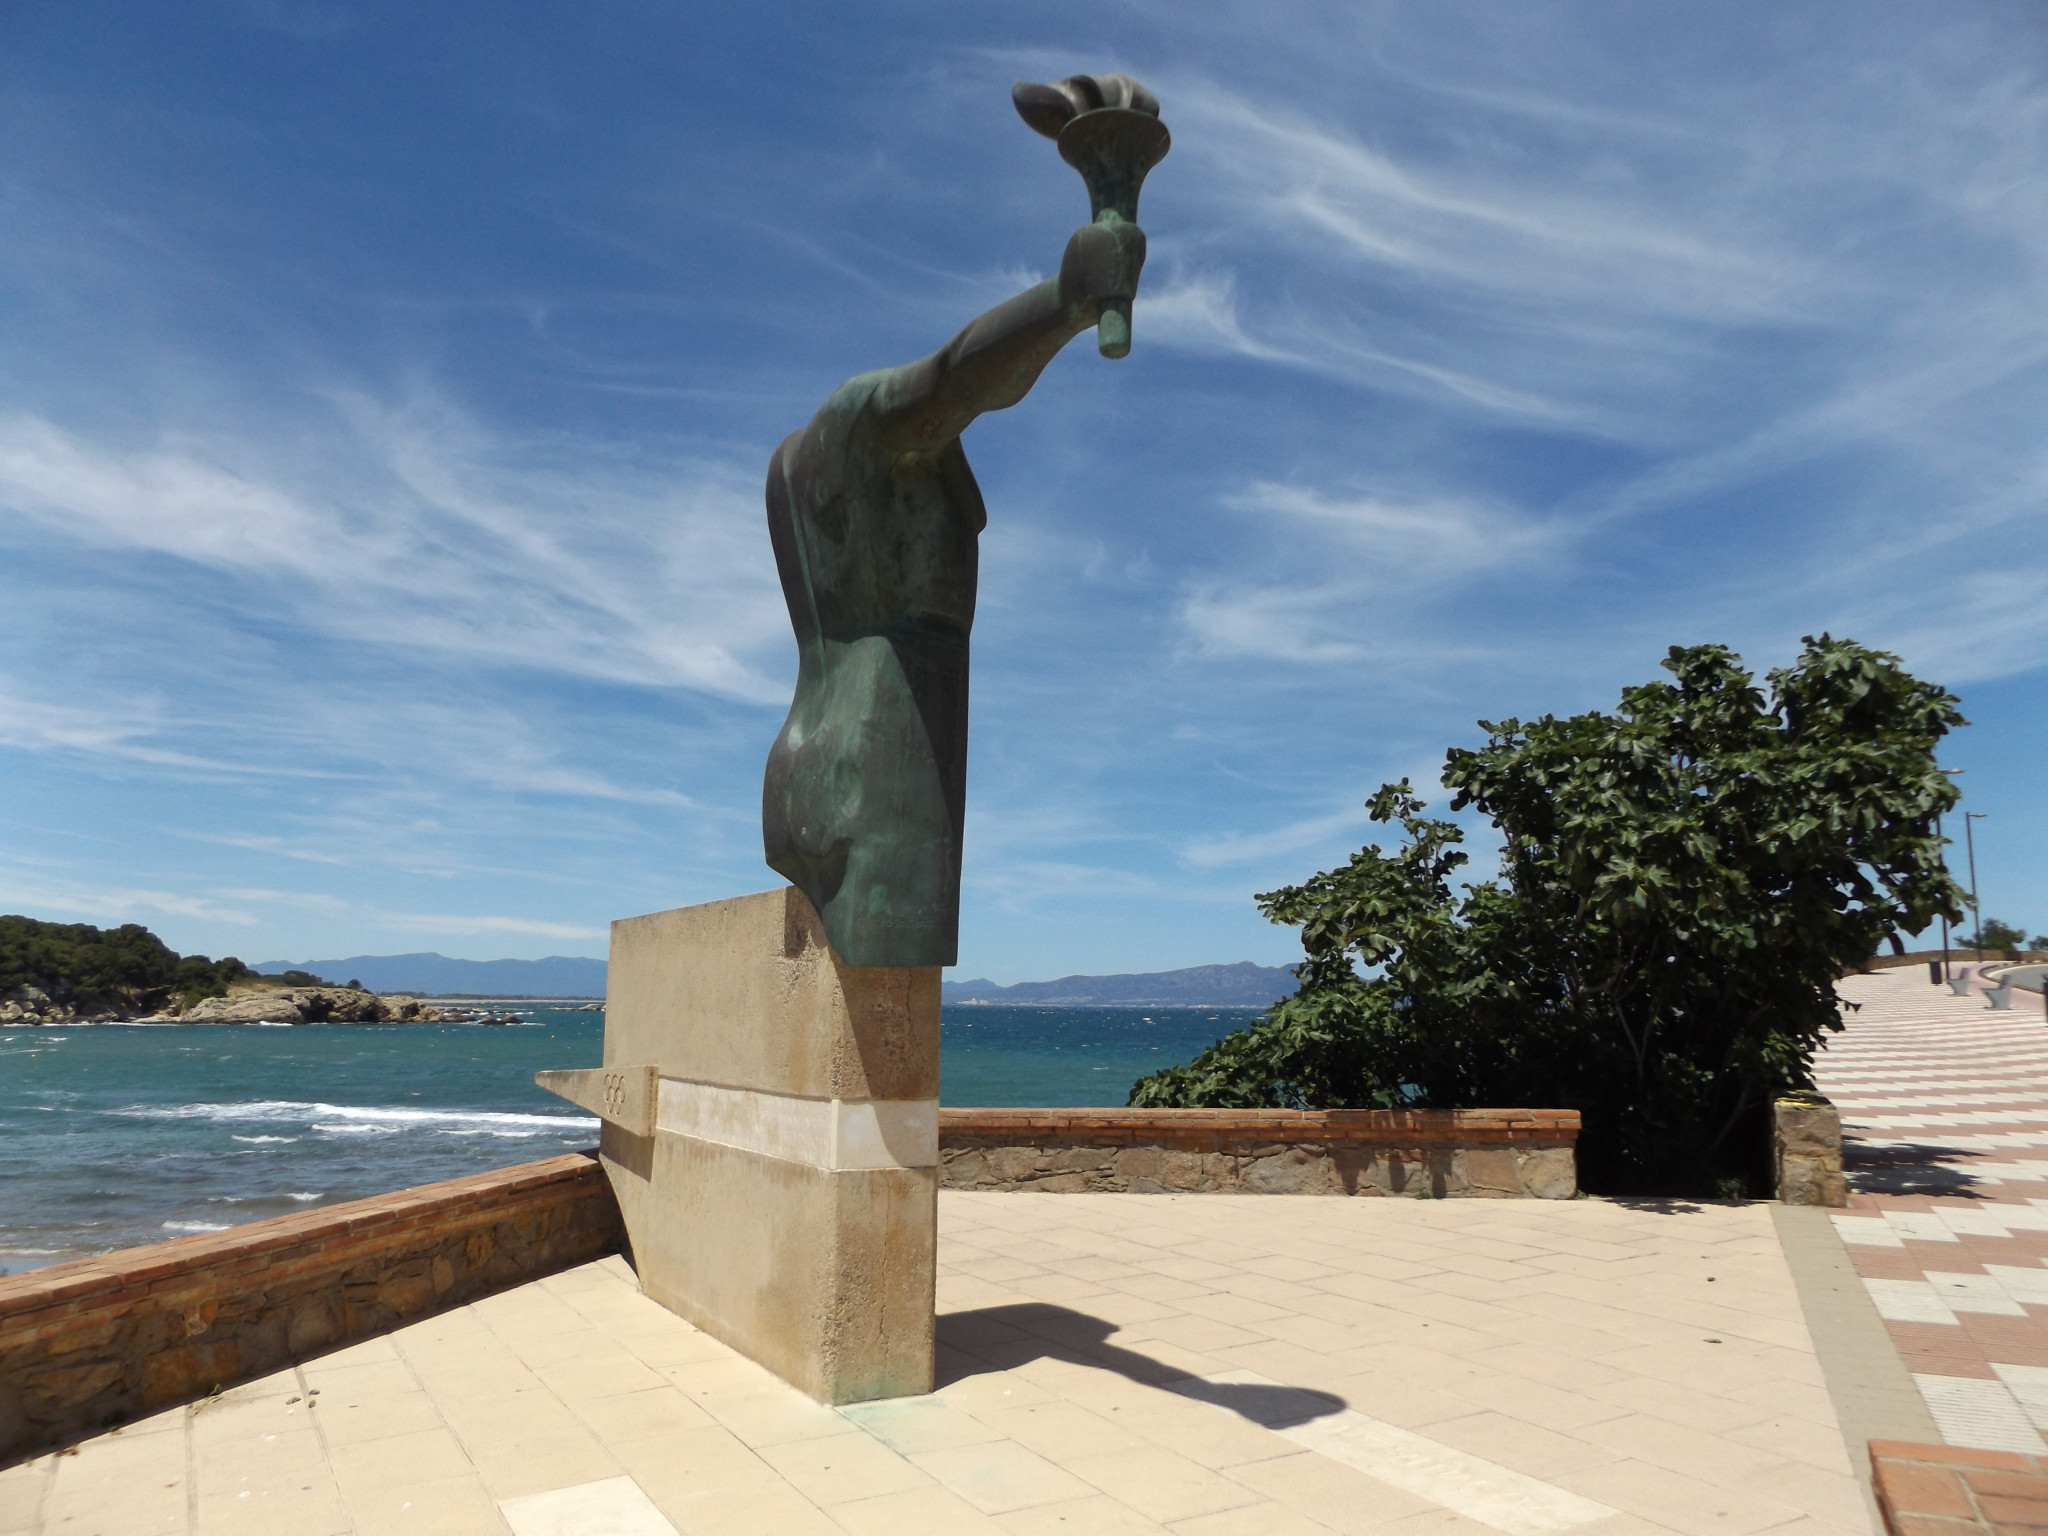 A statue commemorates the arrival of the Barcelona Olympic Torch ©Philip Barker